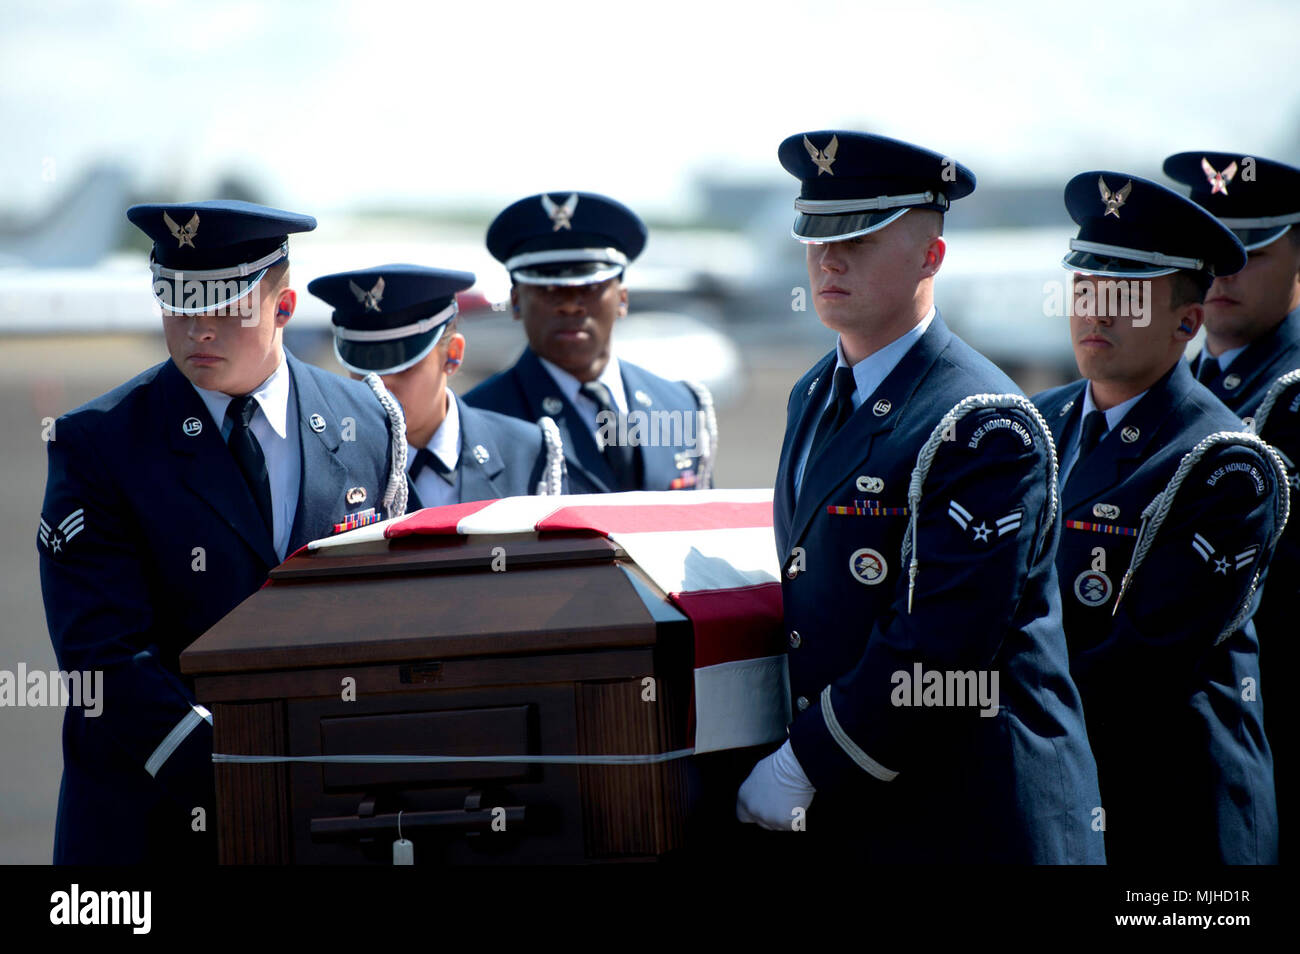 MacDill Air Force Base, Fla., honor guard Airmen perform a dignified arrival ceremony April 4, 2018 at Tampa international Airport in honor of fallen Major Andreas B. O’Keeffe. O’Keefe was an HH-60 Pave Hawk pilot assigned to the 106th Rescue Wing who passed away in a crash in western Iraq. (U.S. Air Force Stock Photo